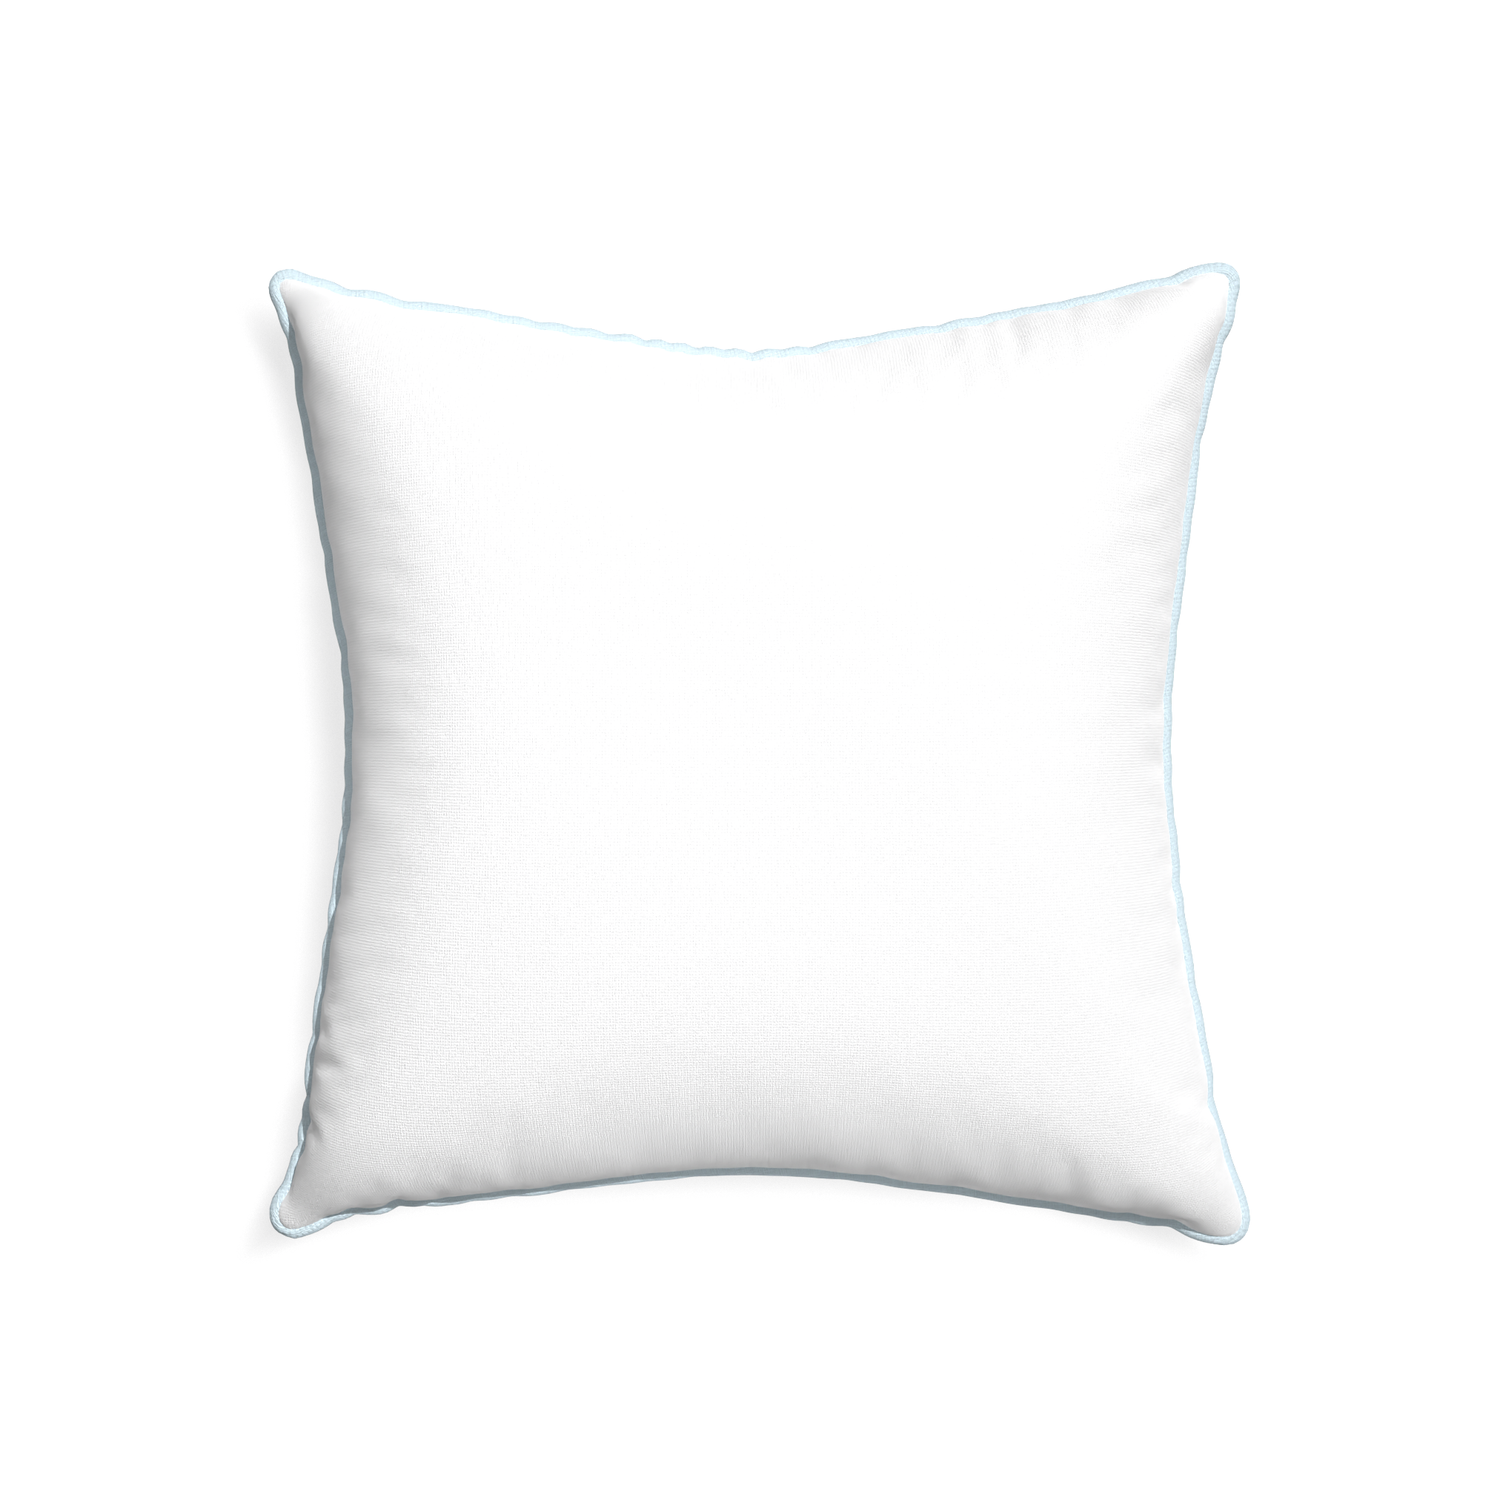 22-square snow custom white cottonpillow with powder piping on white background